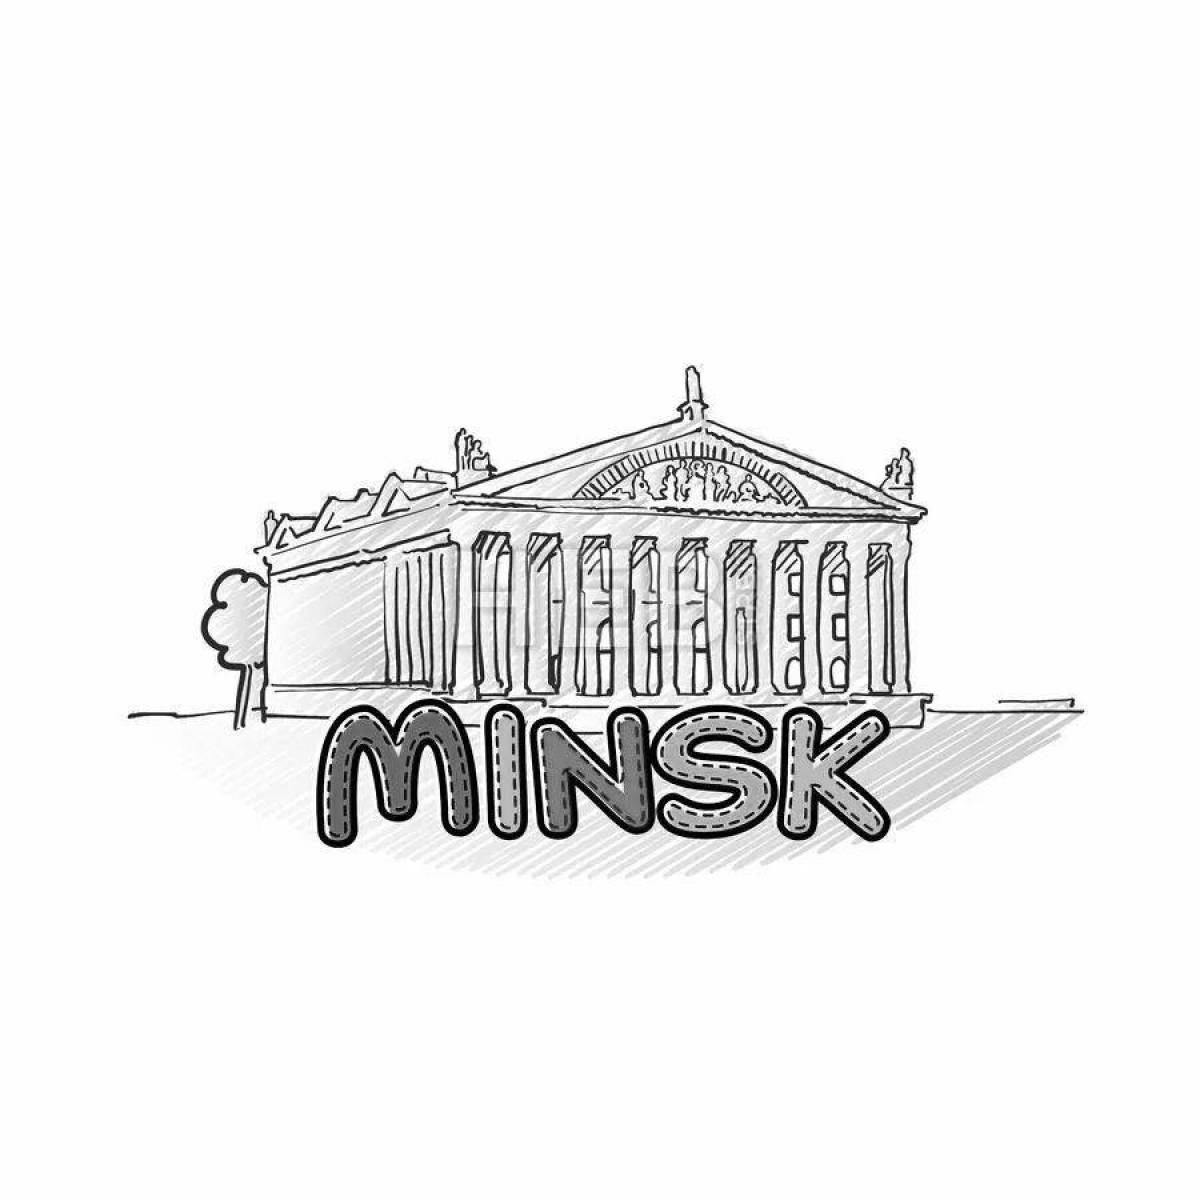 Colouring cheerful Minsk